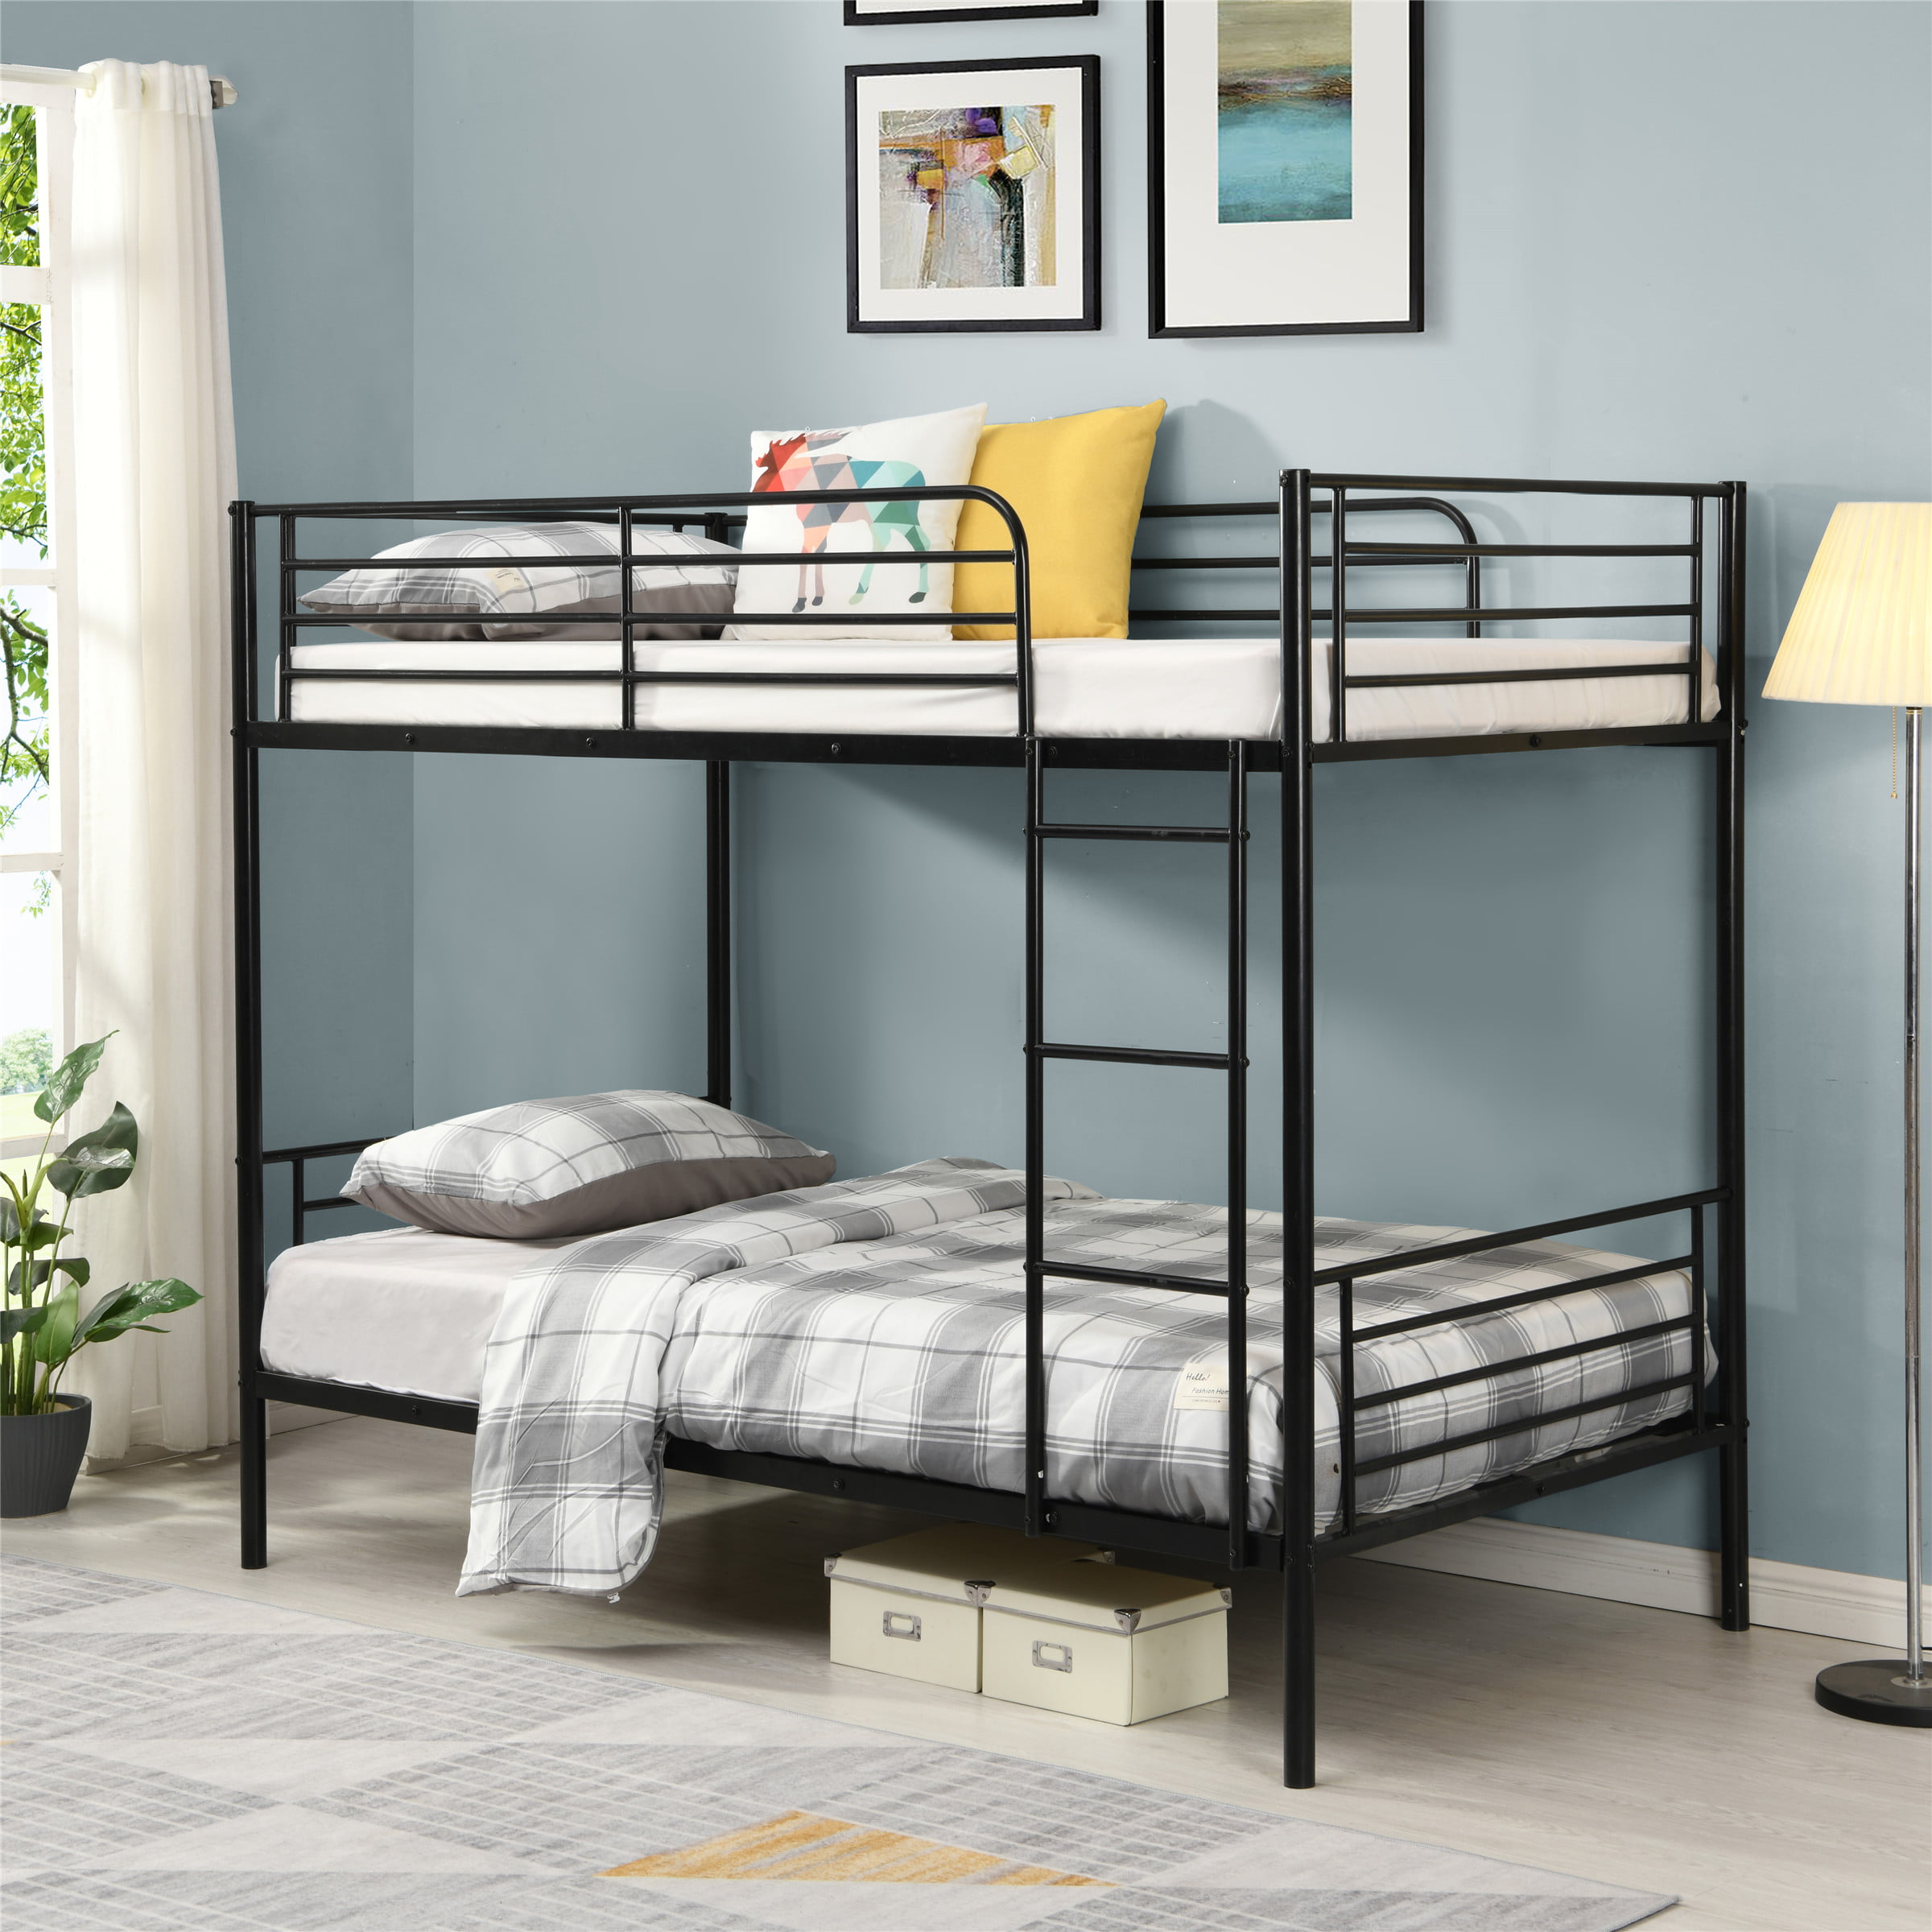 Metal Bunk Bed Frame With Safety, Value City Furniture Metal Bunk Beds